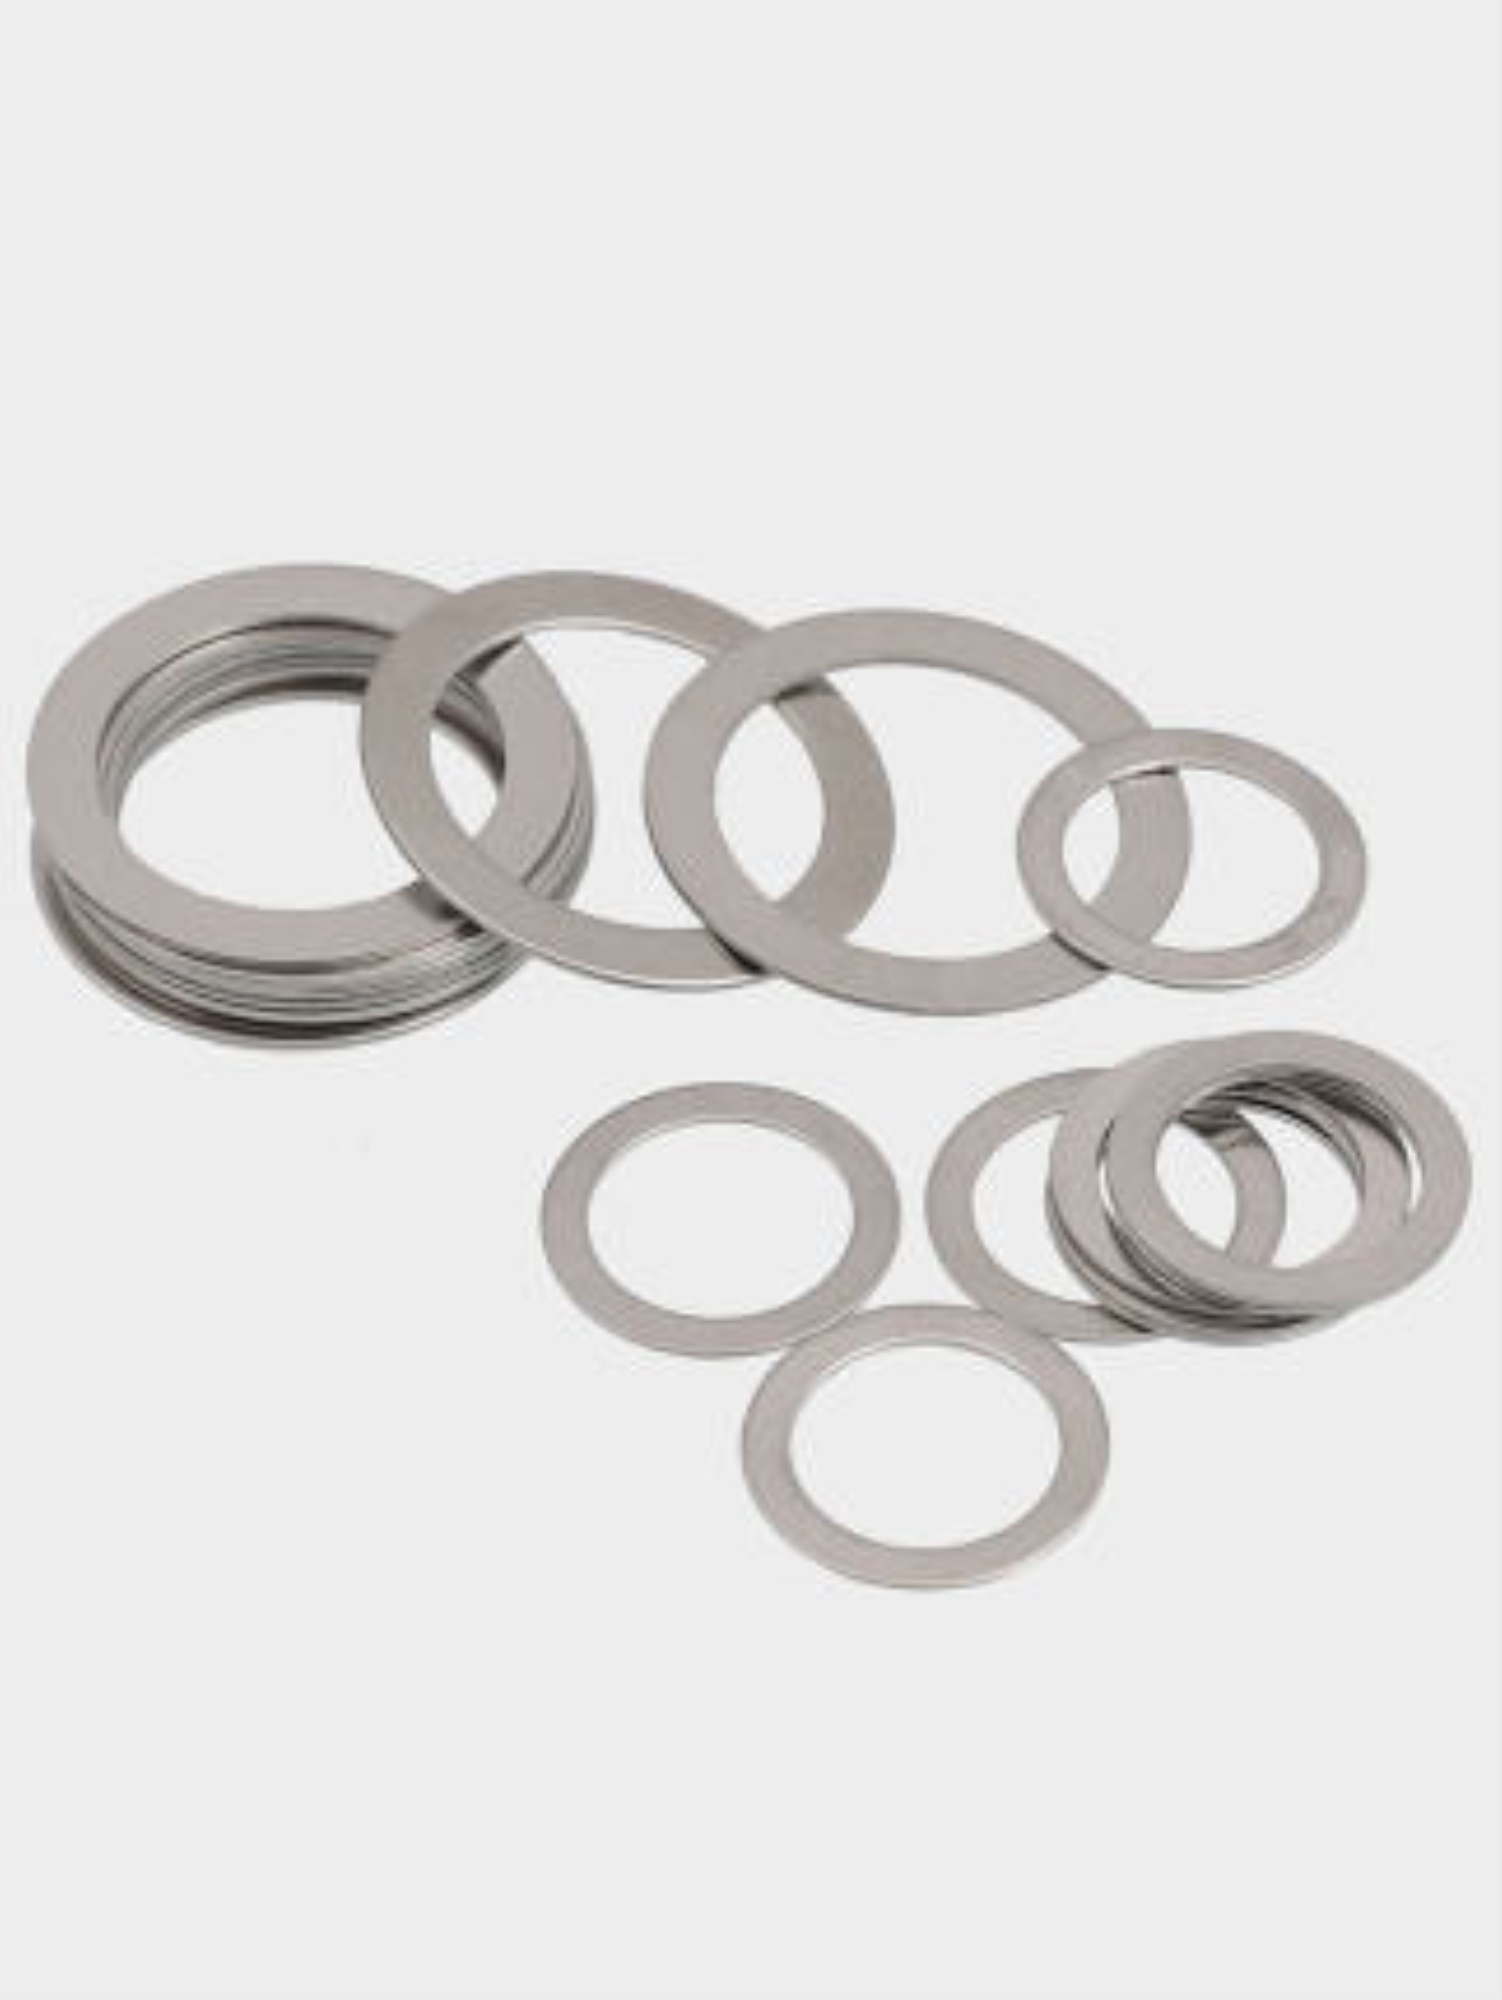 20Pcs M10 Stainless Steel Ultra-thin Washer Flat Gasket 0.1 0.2mm-1mm Thickness 